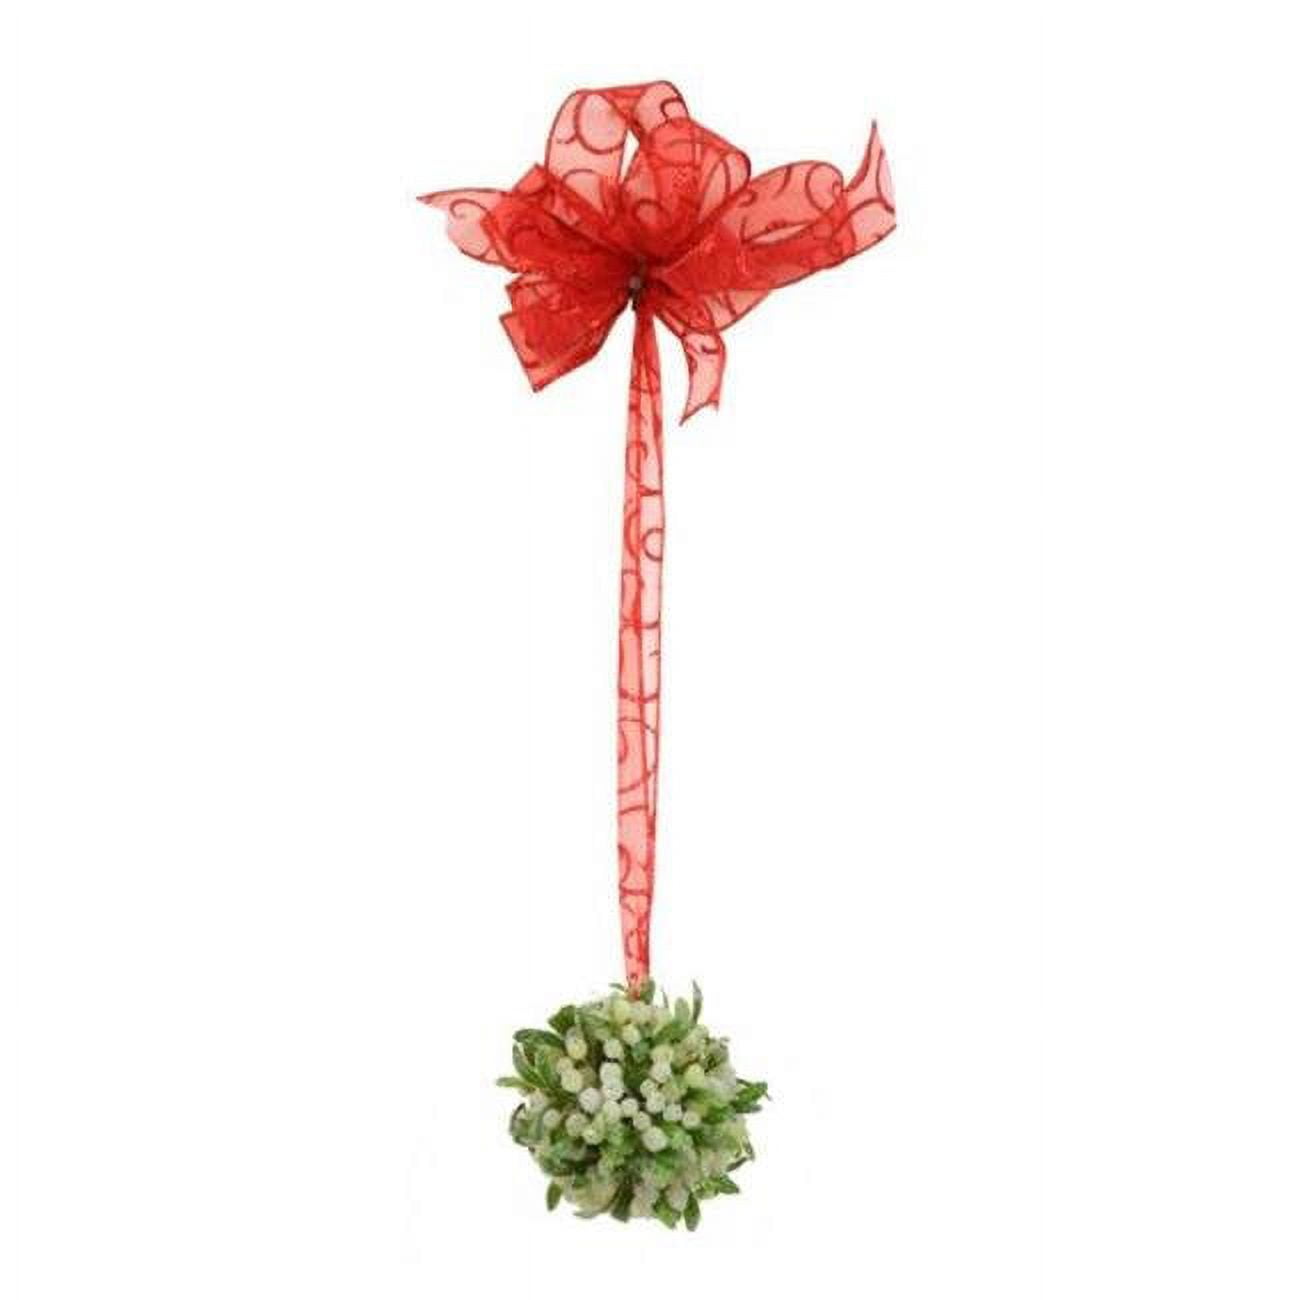 Distinctive Designs Xo-502 4 In. Mistletoe Ball With Berries, Green - Pack Of 12